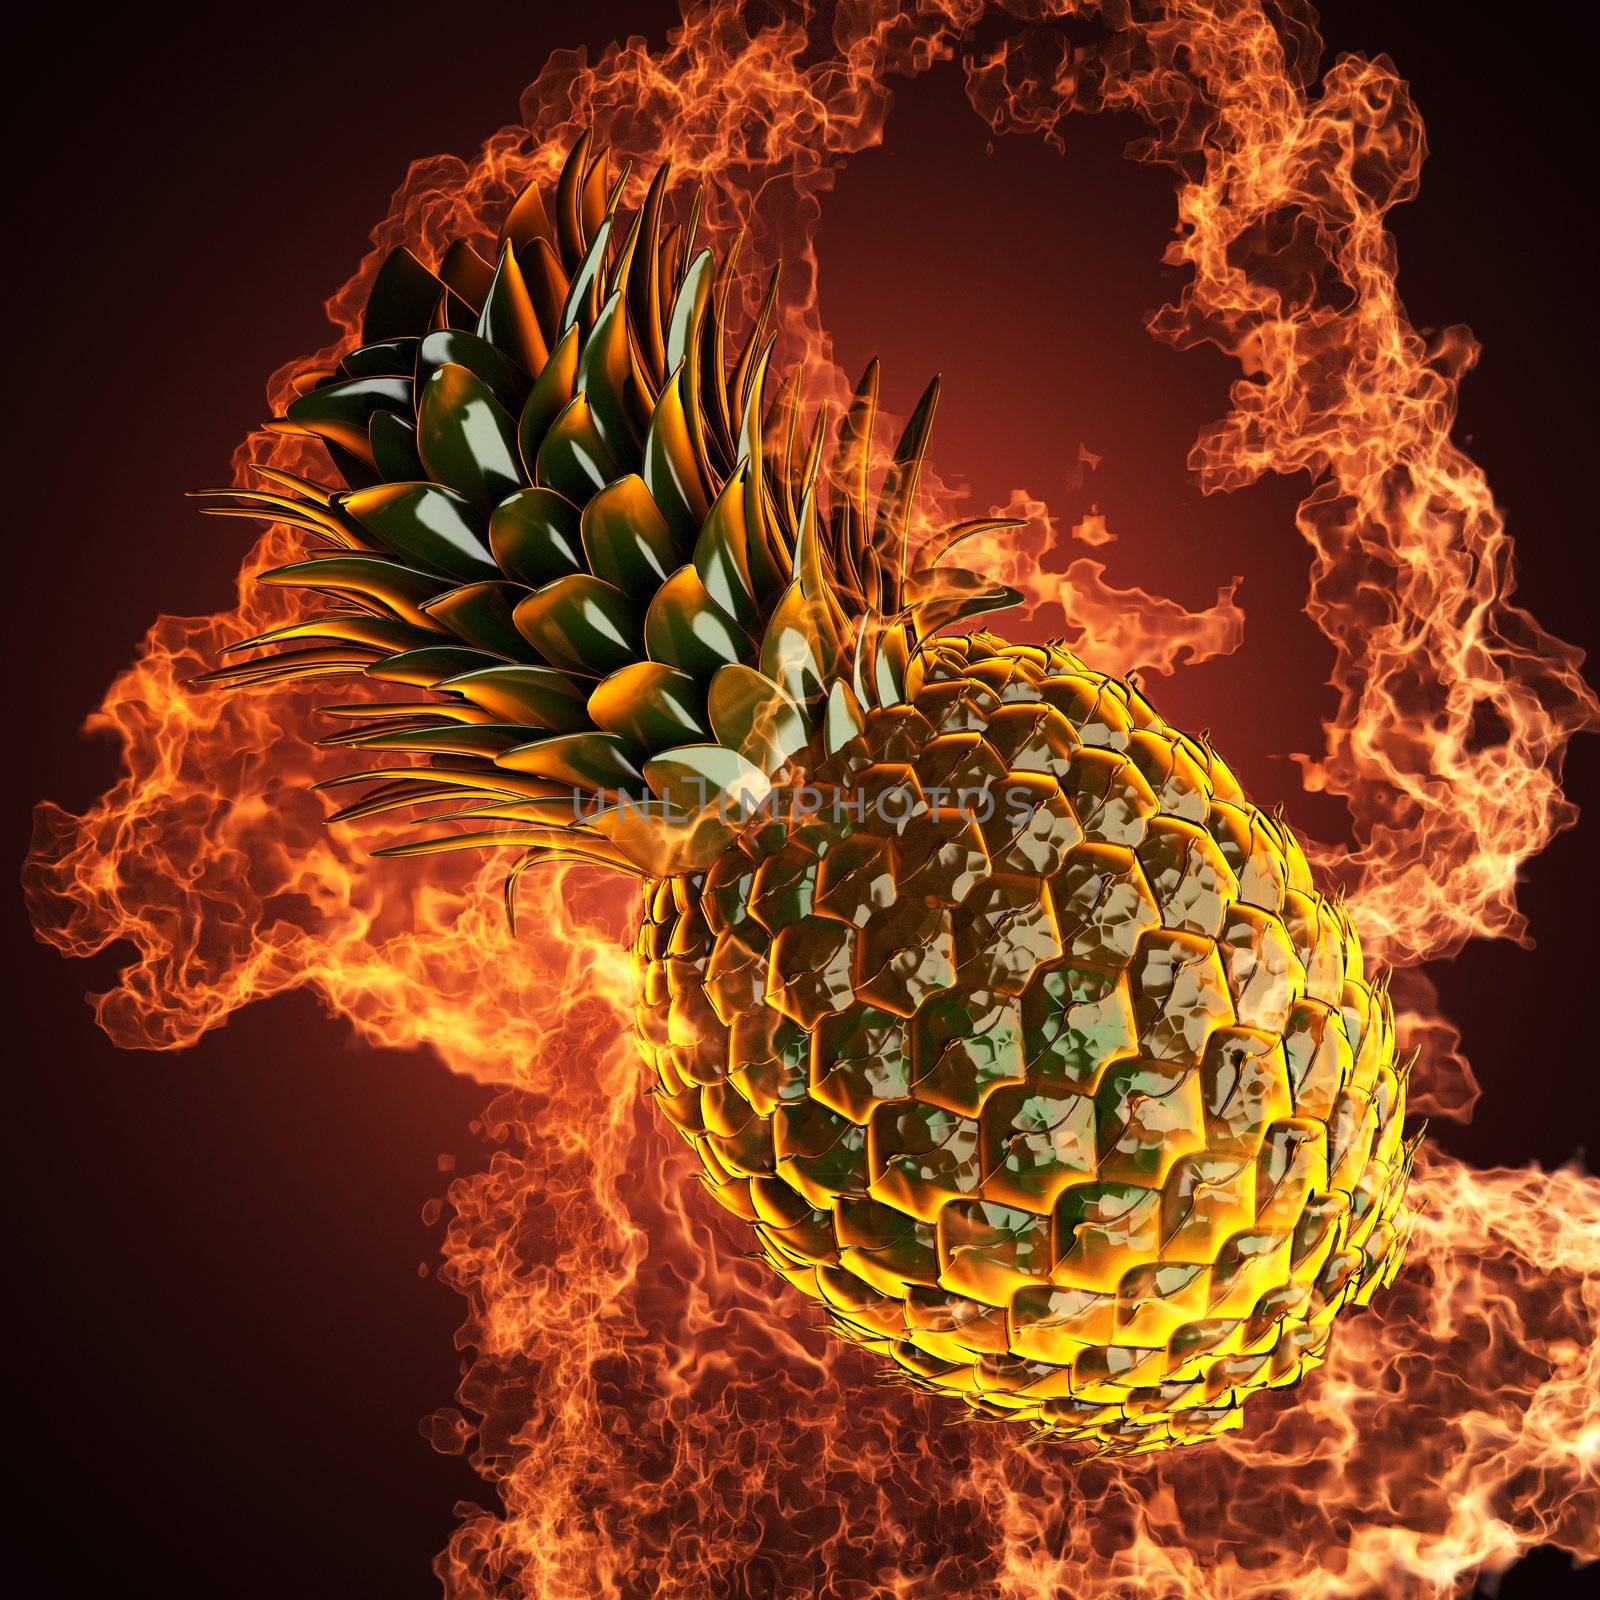 Pineapple in fire made in 3D